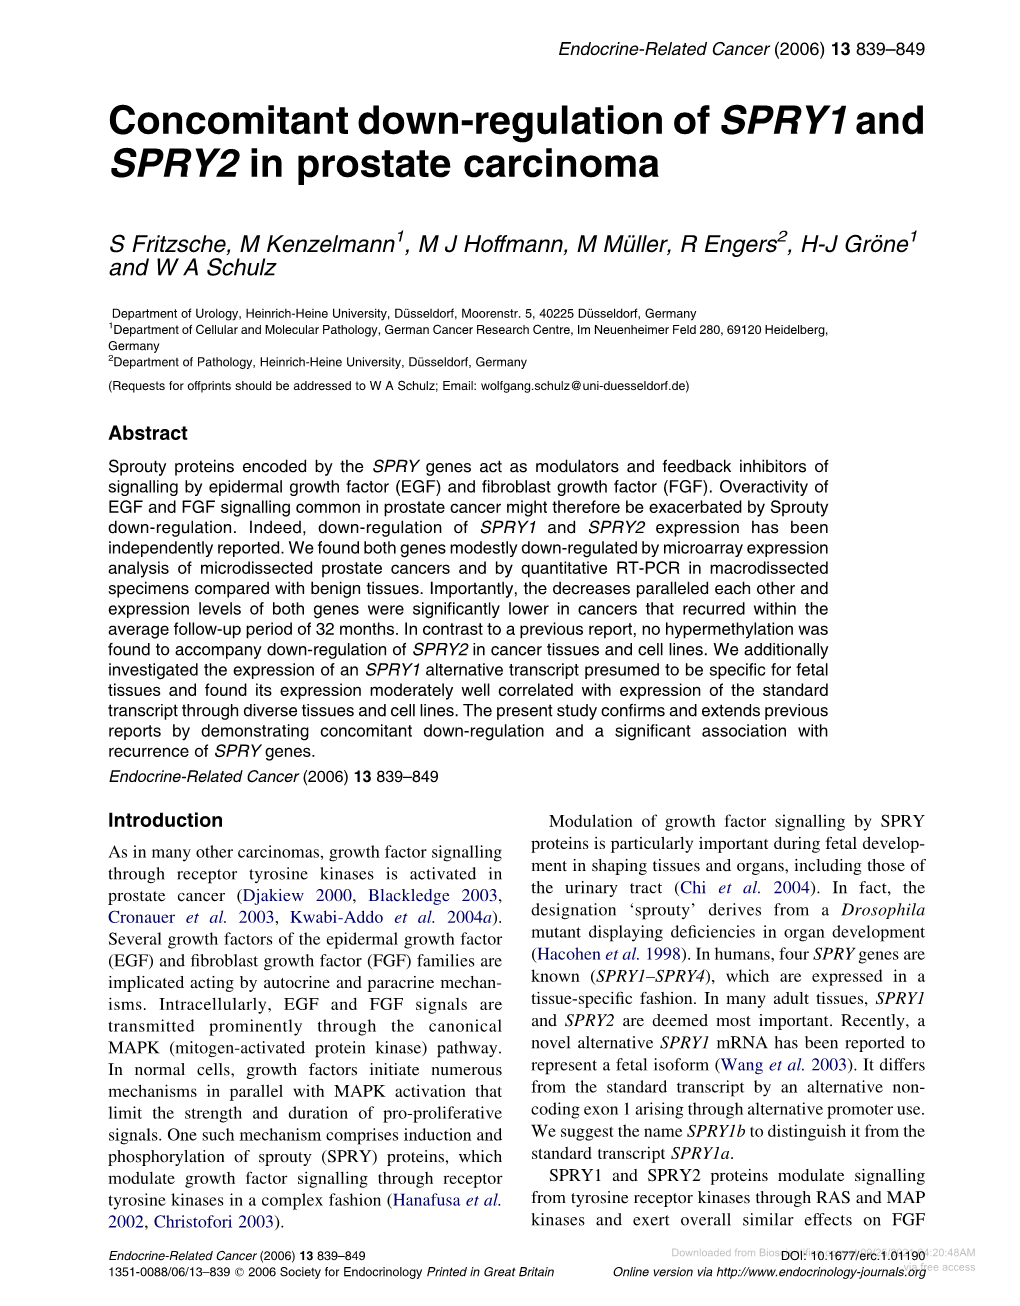 Concomitant Down-Regulation of SPRY1 and SPRY2 in Prostate Carcinoma